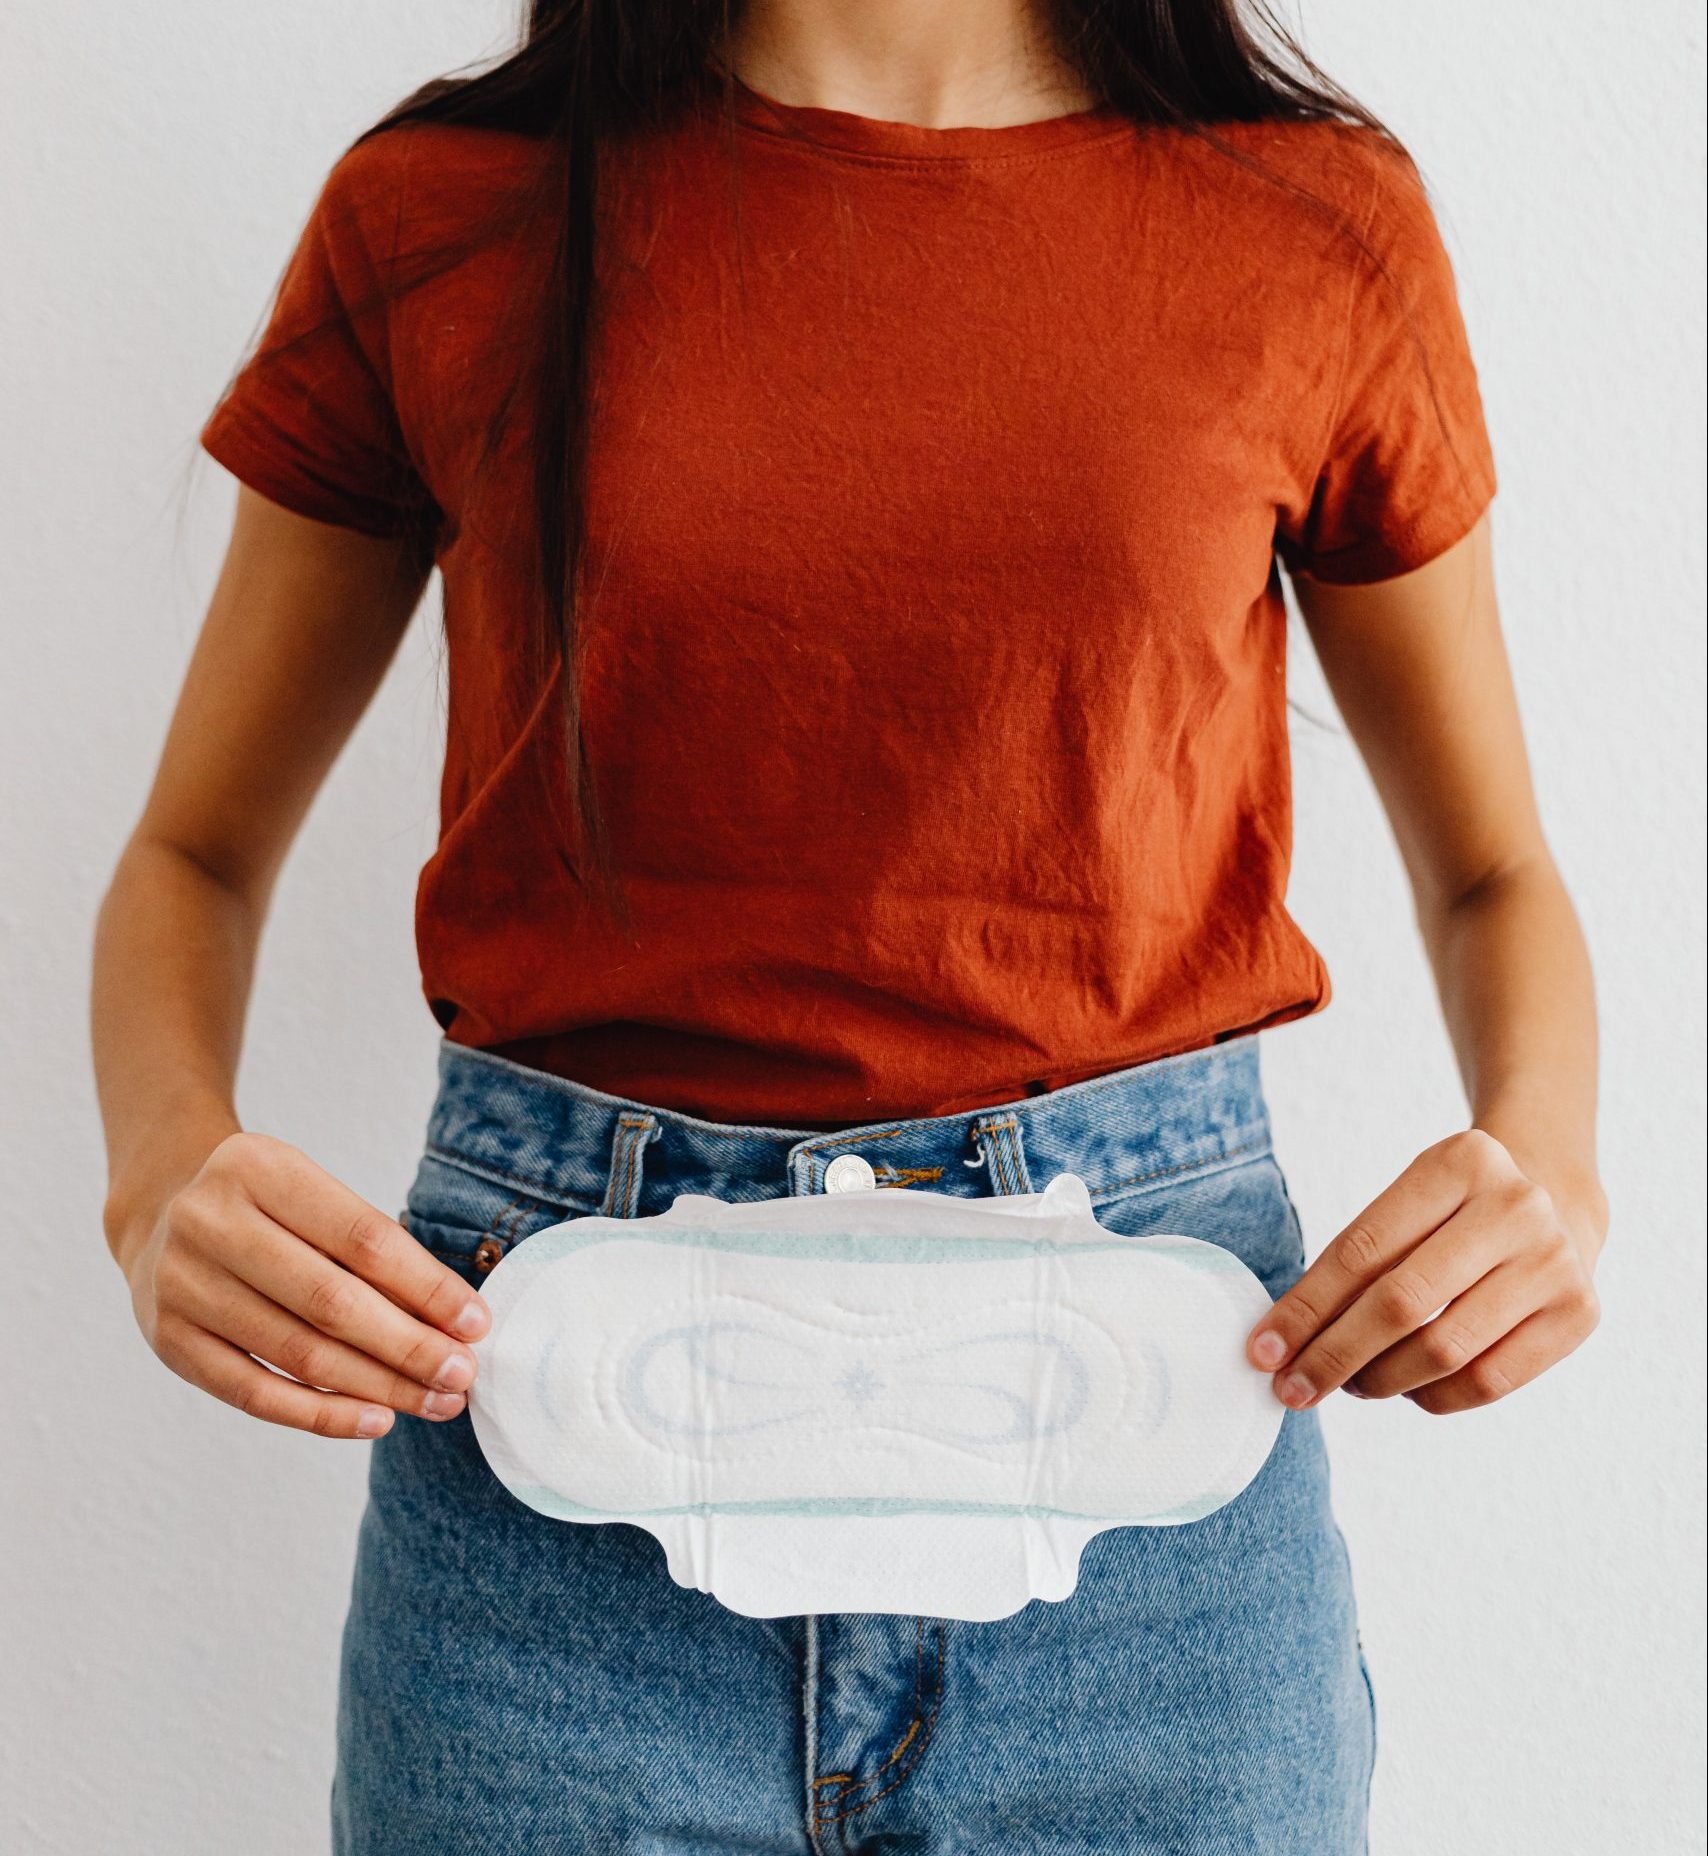 Selangor hopes to tackle period poverty by offering free sanitary pads. Image for illustration only. Image credit: Karolina Grabowska via Pexels